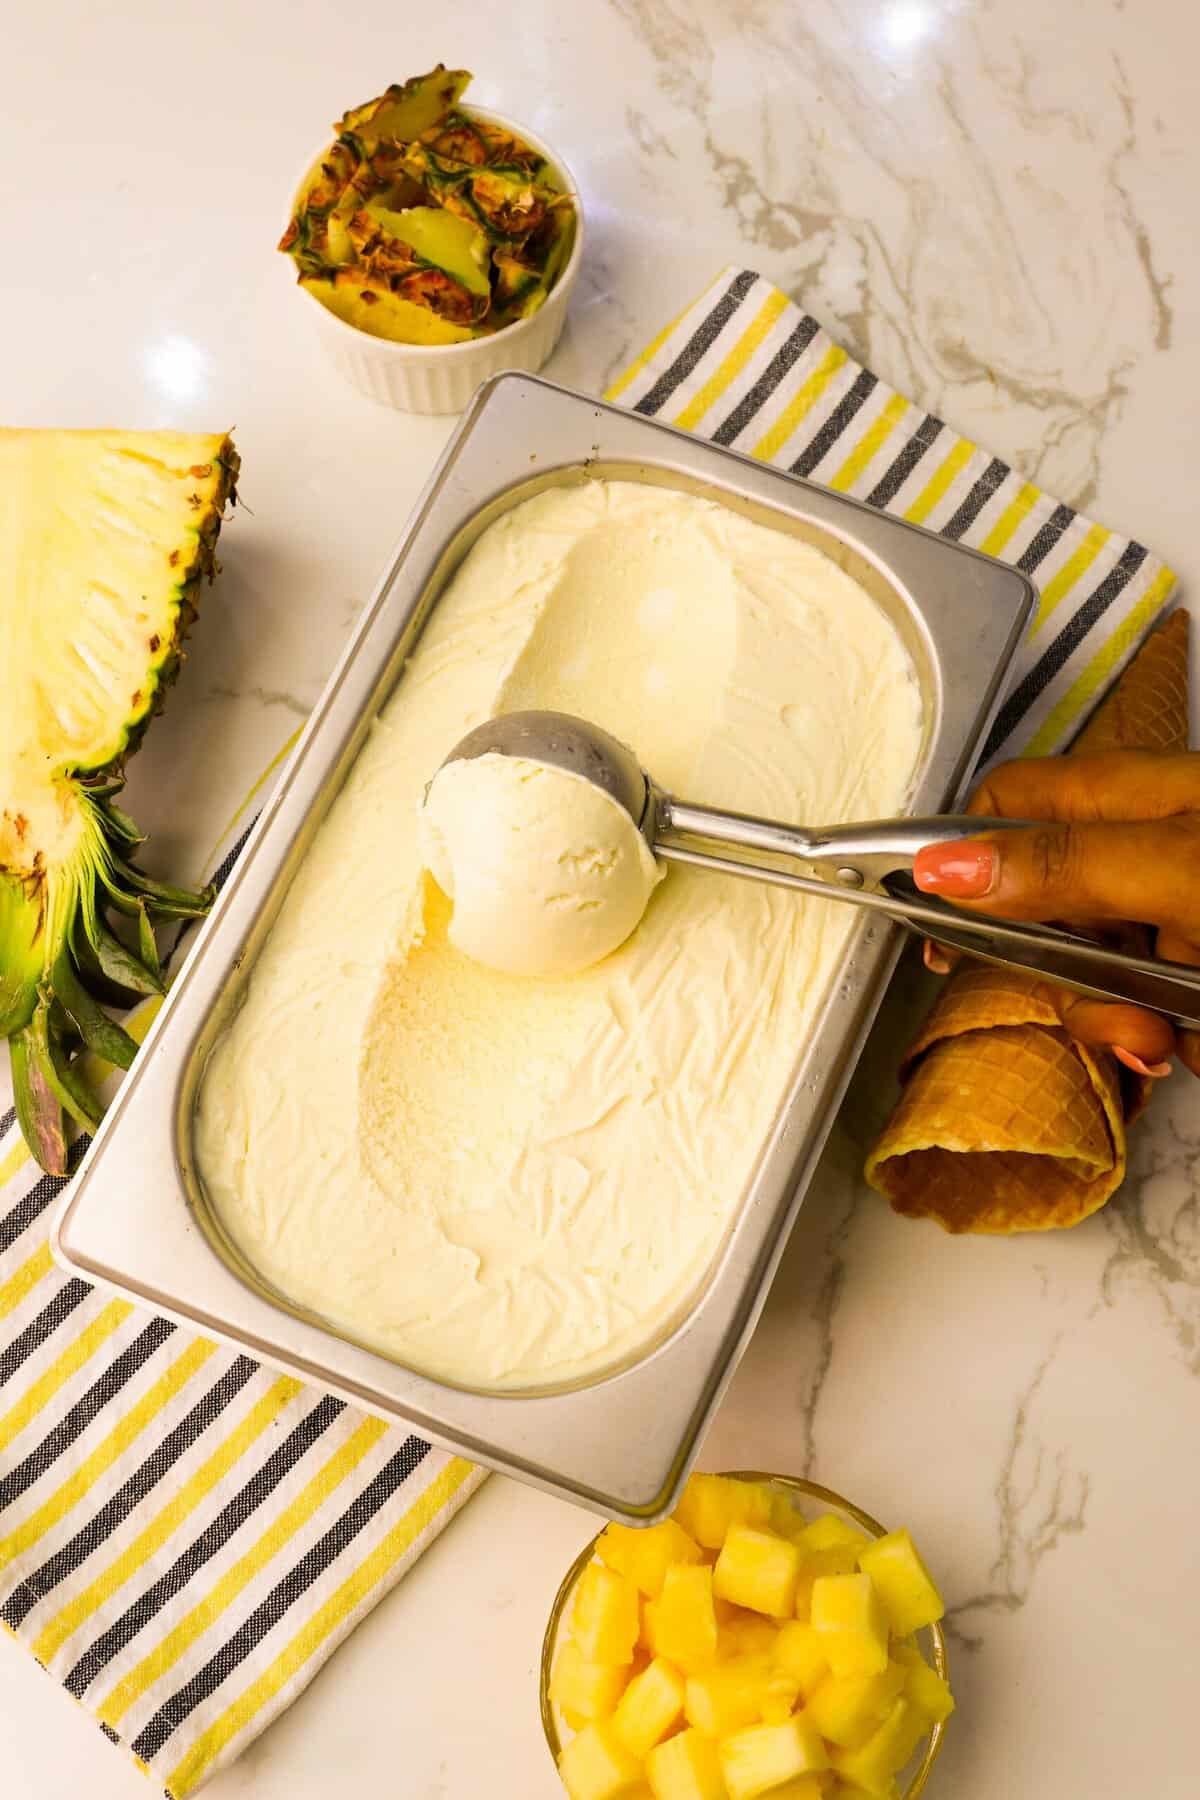 Scooping up homemade pineapple ice cream for a refreshingly tropical treat